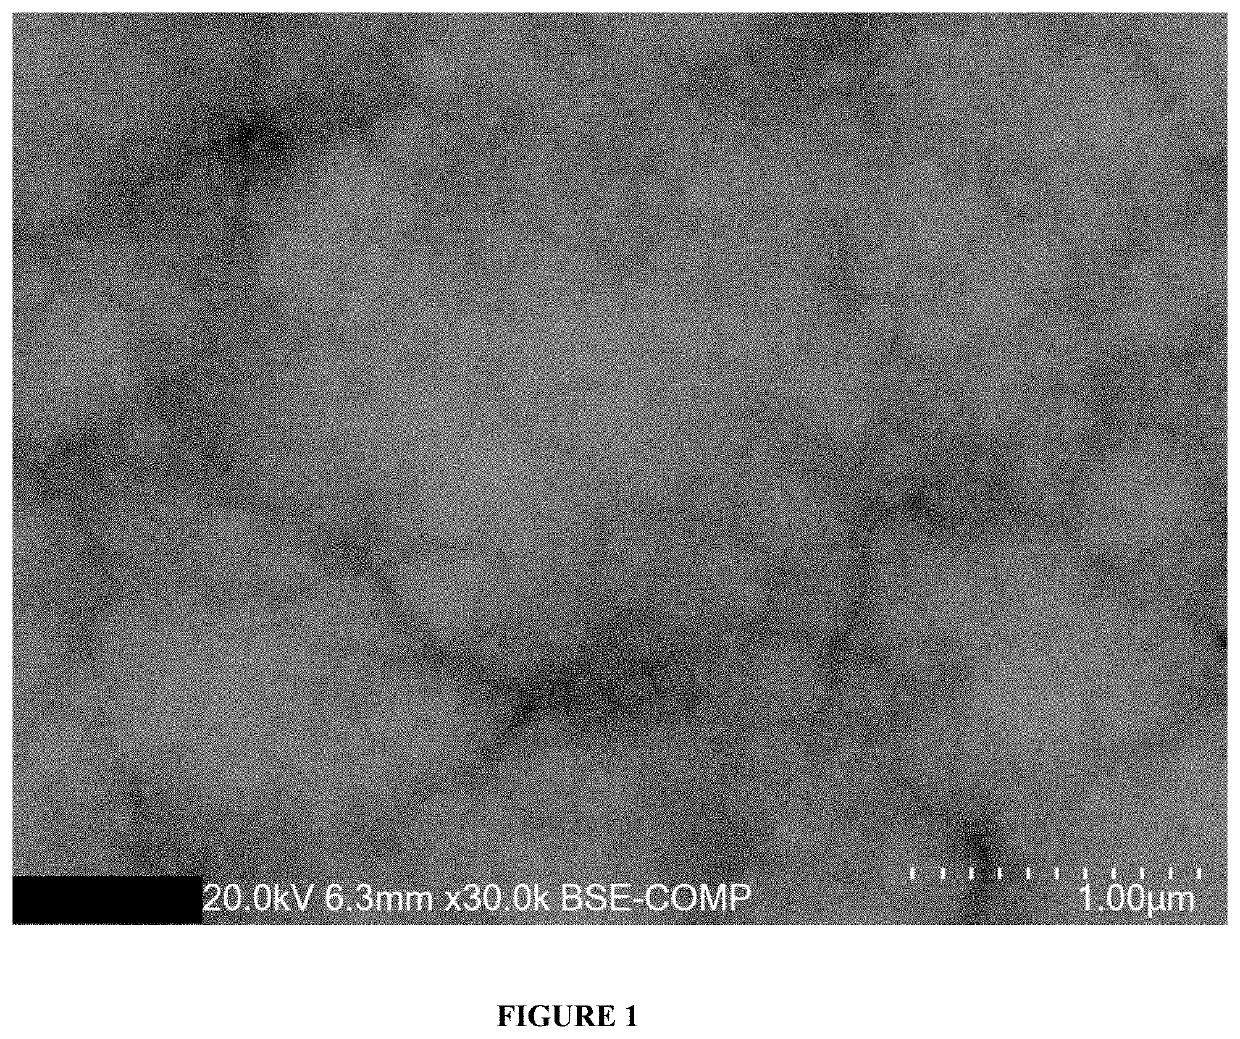 Acid aqueous binary silver-bismuth alloy electroplating compositions and methods